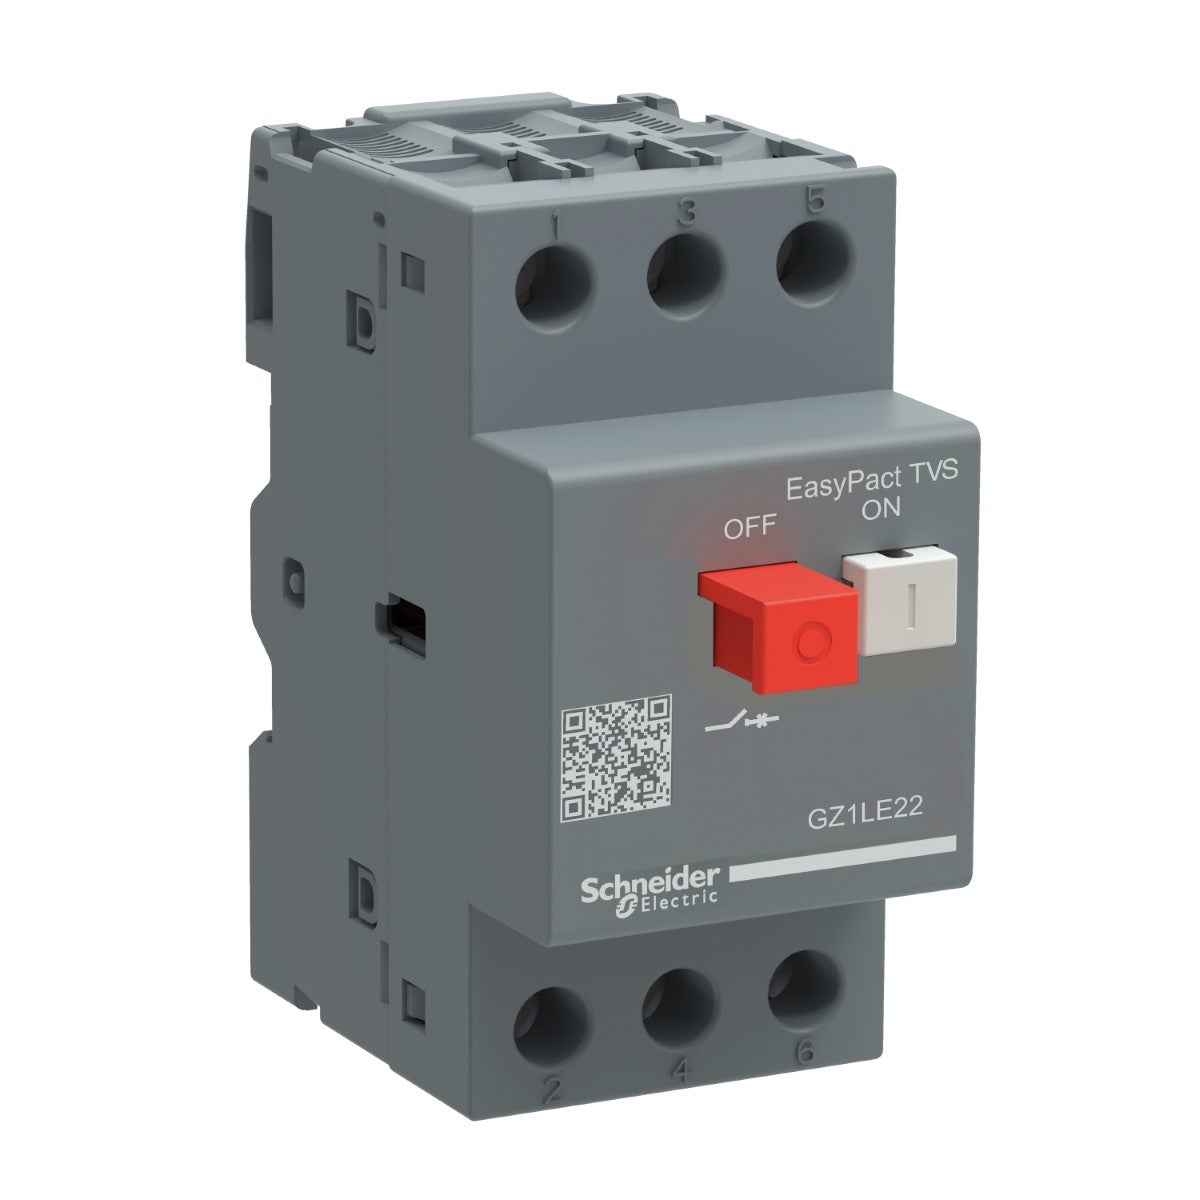 Motor circuit breaker,EasyPact GZ1,3P,10A,magnetic detection